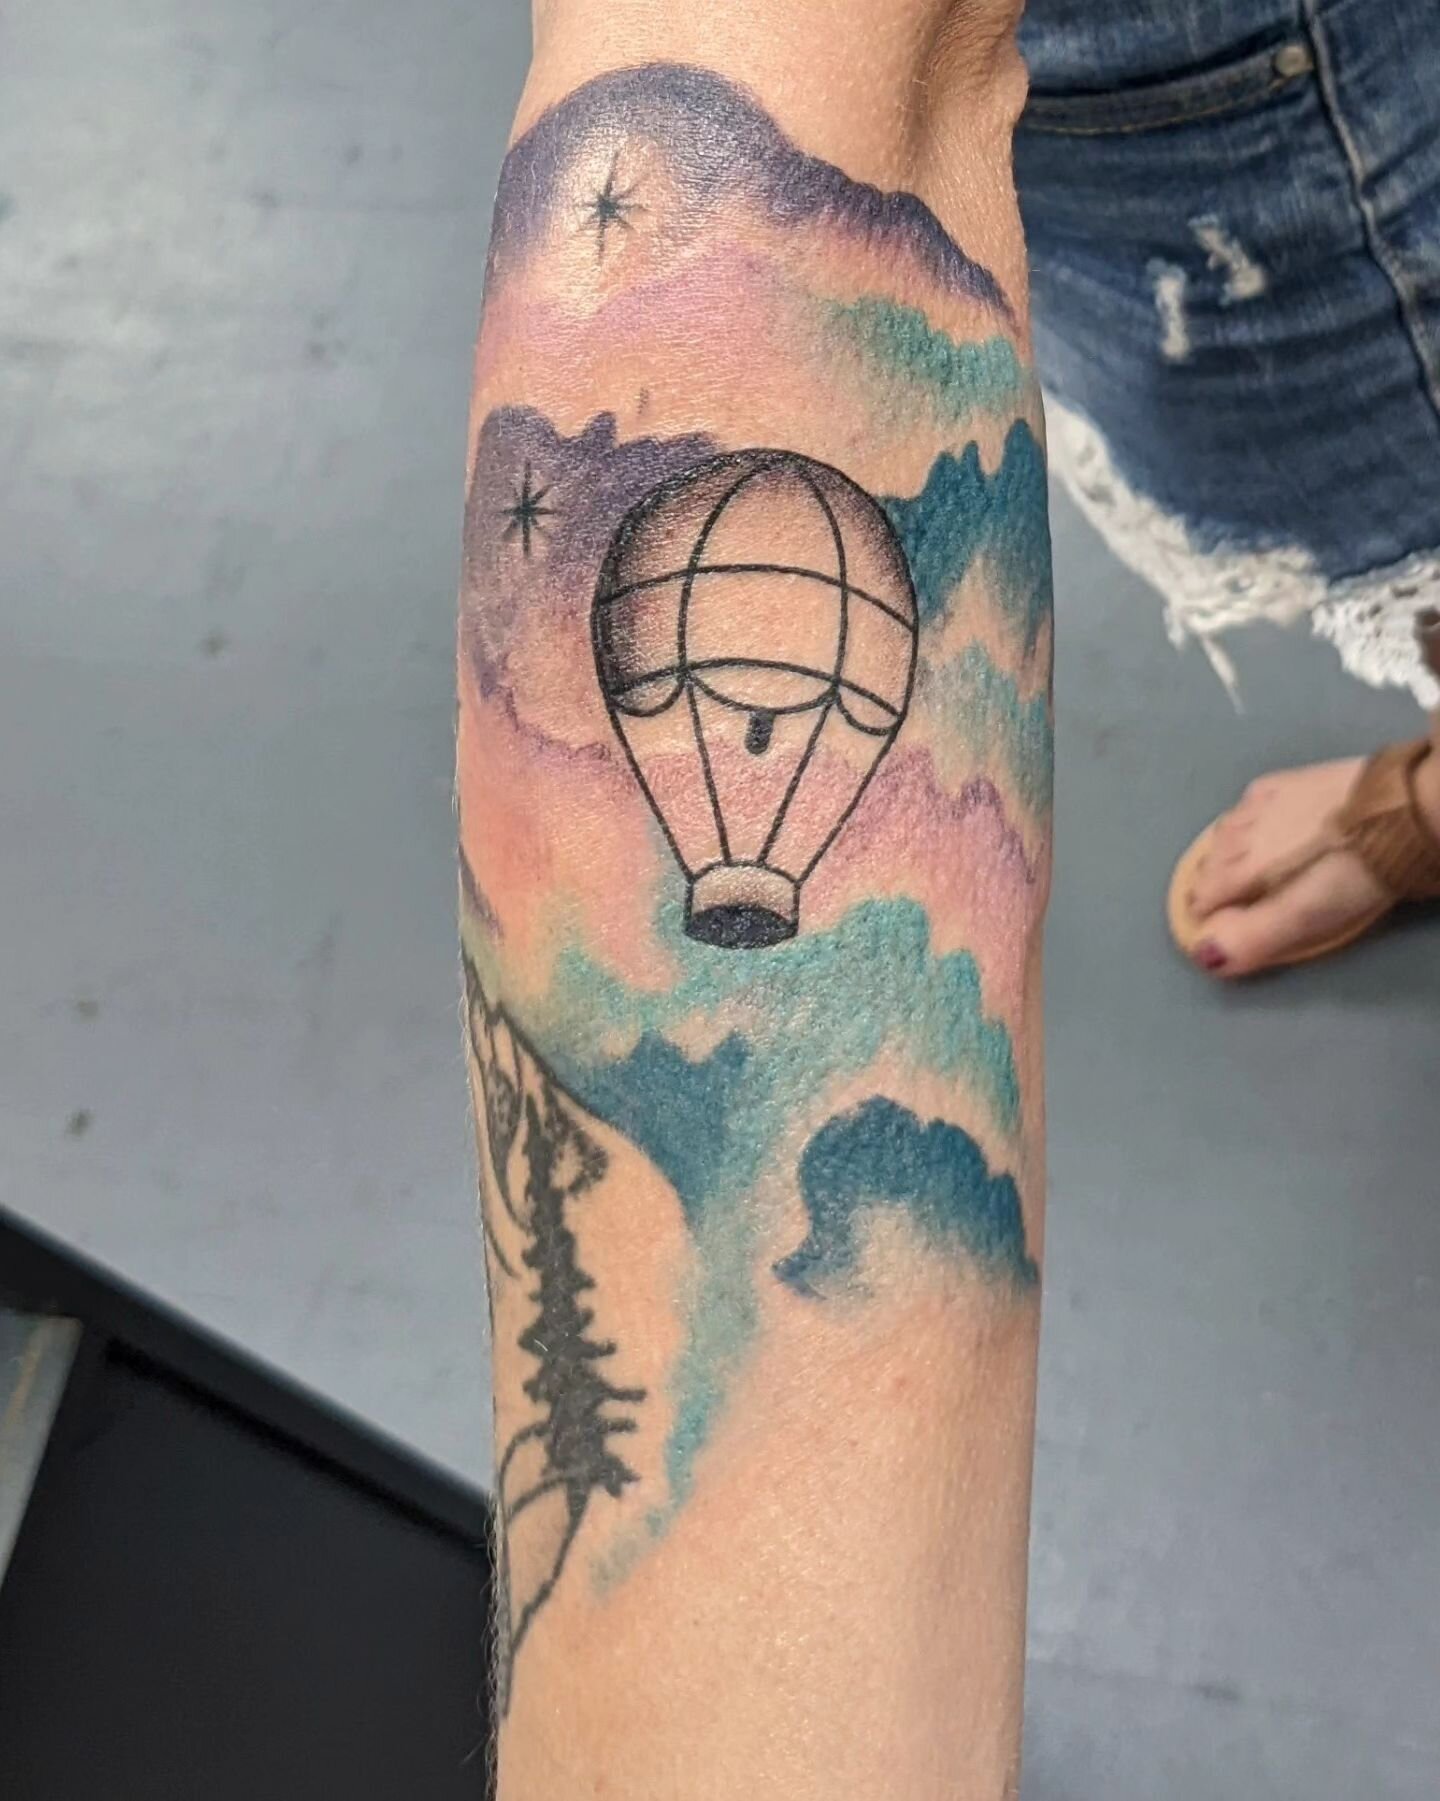 Still loving the color matching I did for her on an existing piece!  Swipe to see the rotation! You can see where my extension starts, near the two stars on the left side of the first pic. July '22! (We're working through it!)

.
.
.
.
.

#tattoos #h